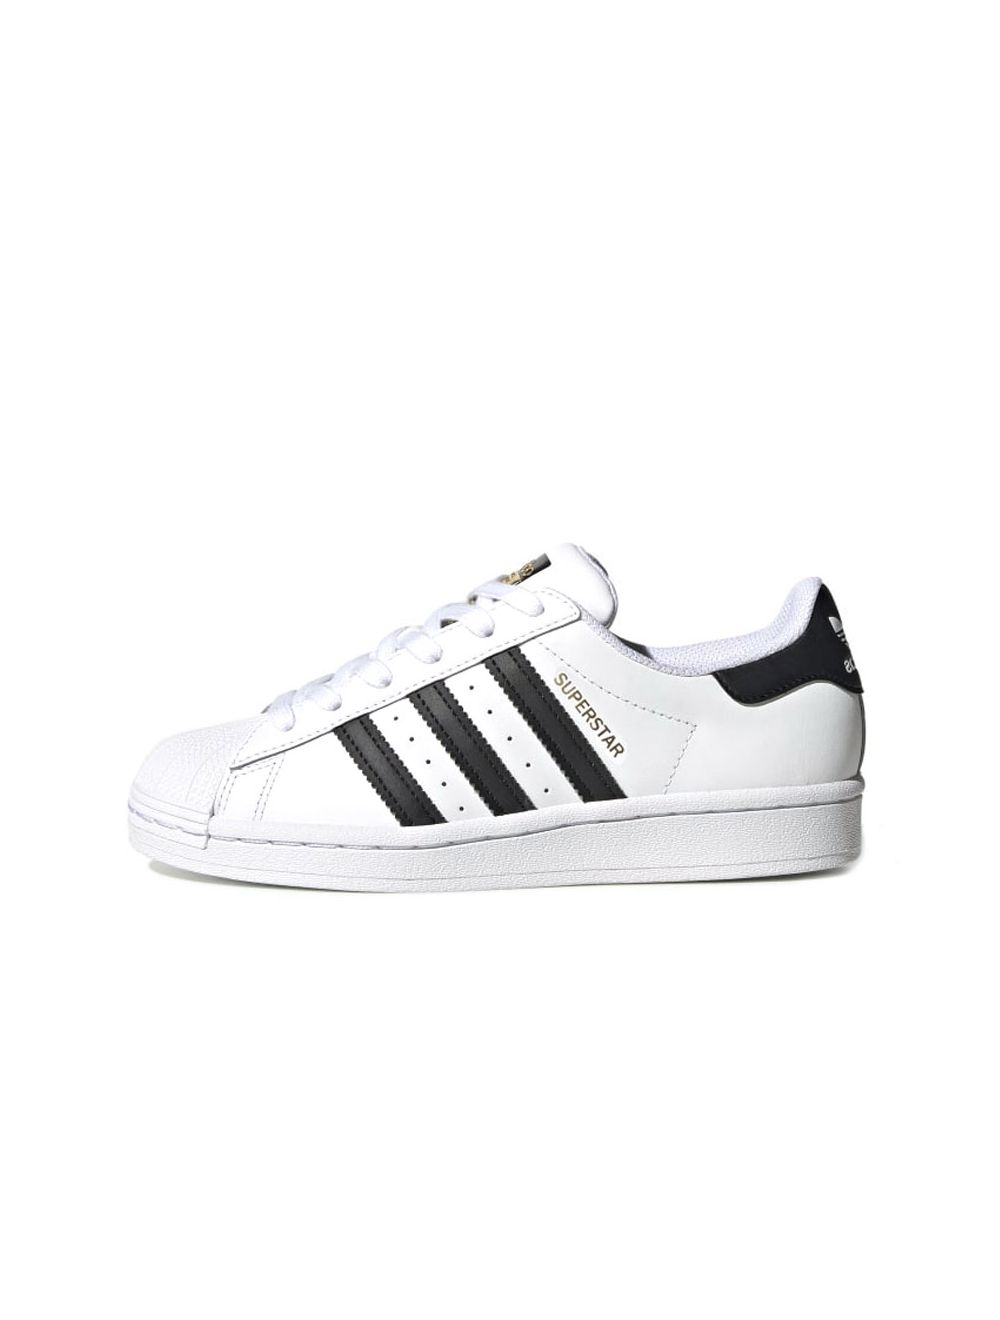 adidas superstar size 3.5 youth